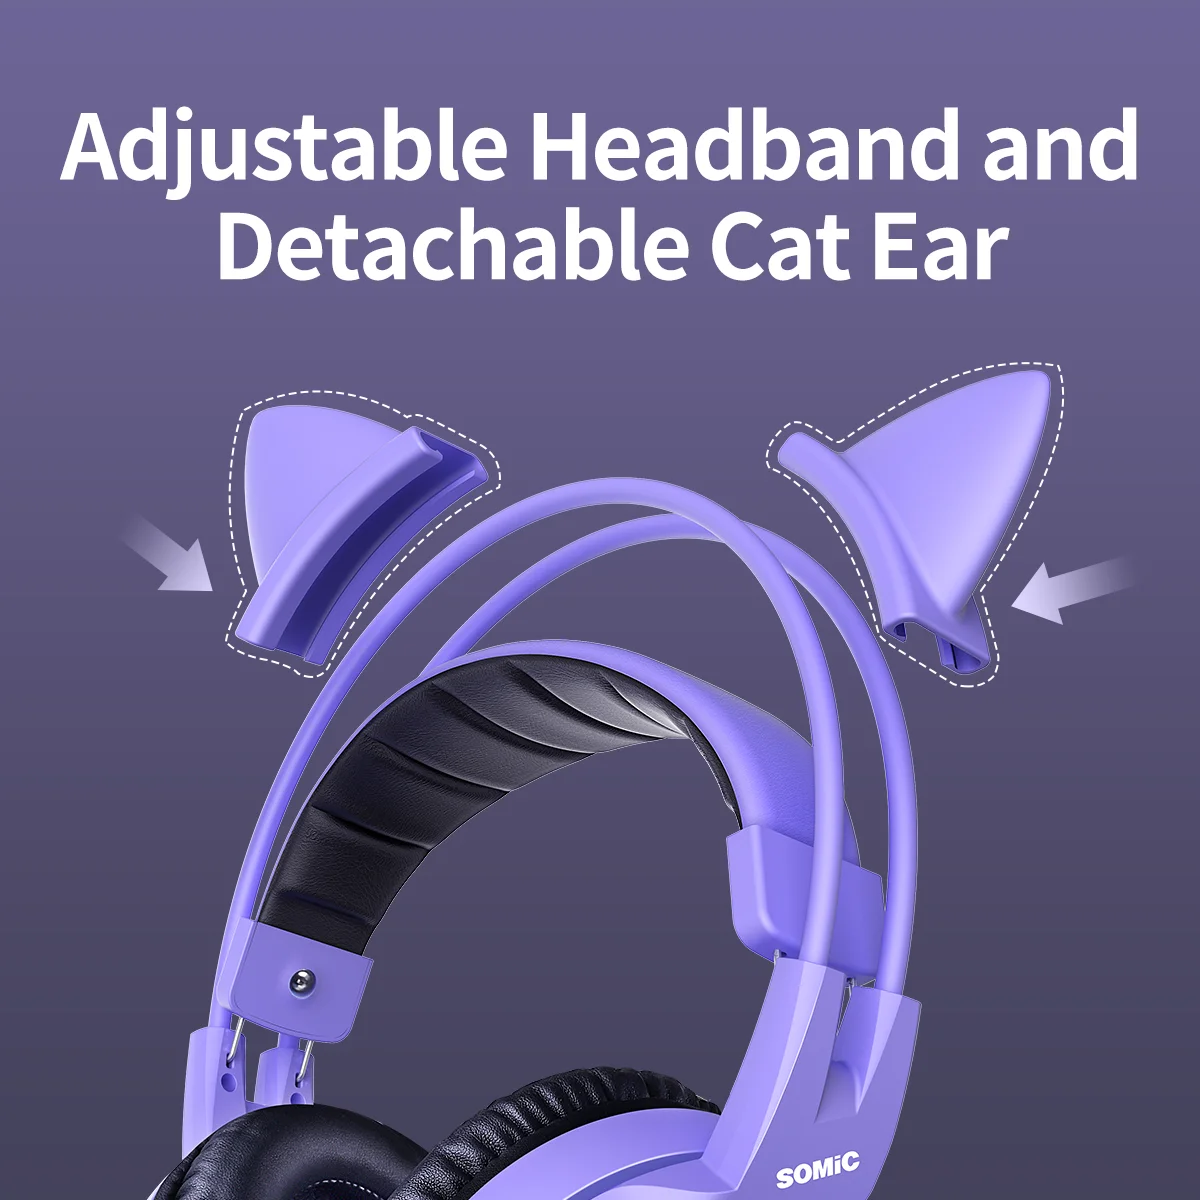 Up your gaming set-up with this cool Cat Ear Purple Headphone!lolithecat.com